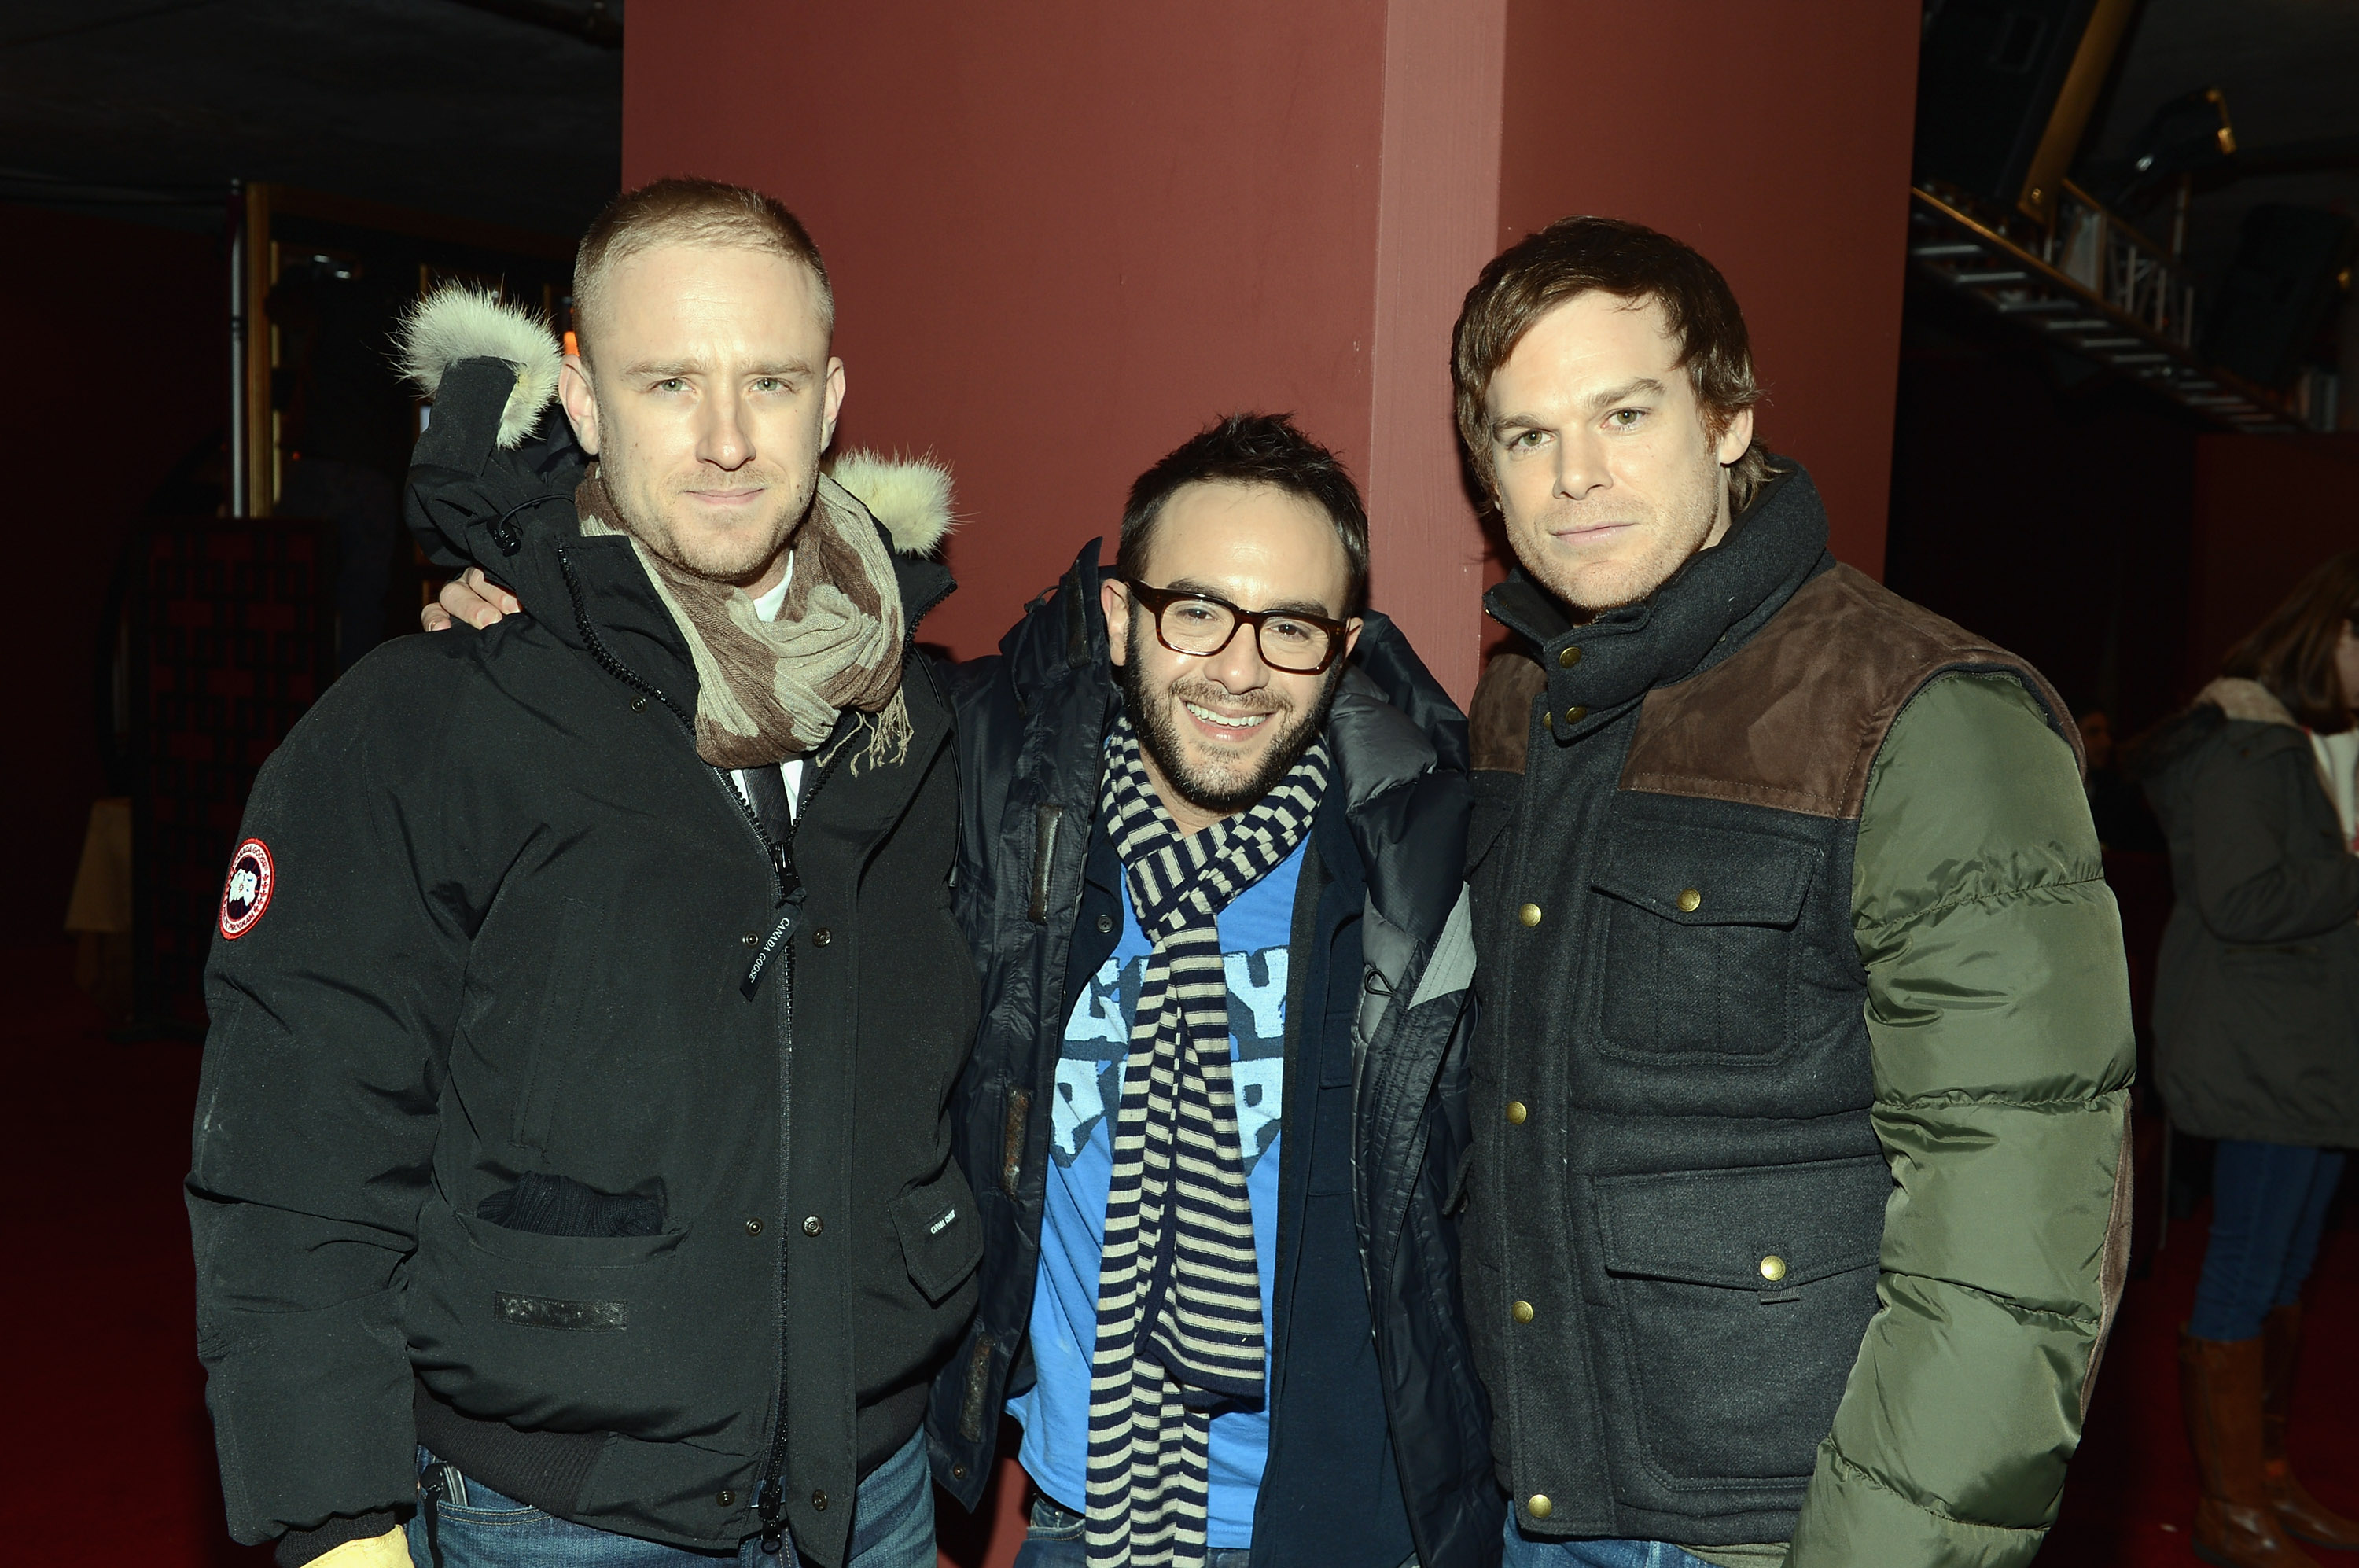 PARK CITY, UT - JANUARY 19: (L-R) Actor Ben Foster, director John Krokidas and actor Michael C. Hall attend the Stella Artois "Kill Your Darlings" press junket on January 19, 2013 in Park City, Utah.  (Photo by Andrew H. Walker/Getty Images for Stella Artois)